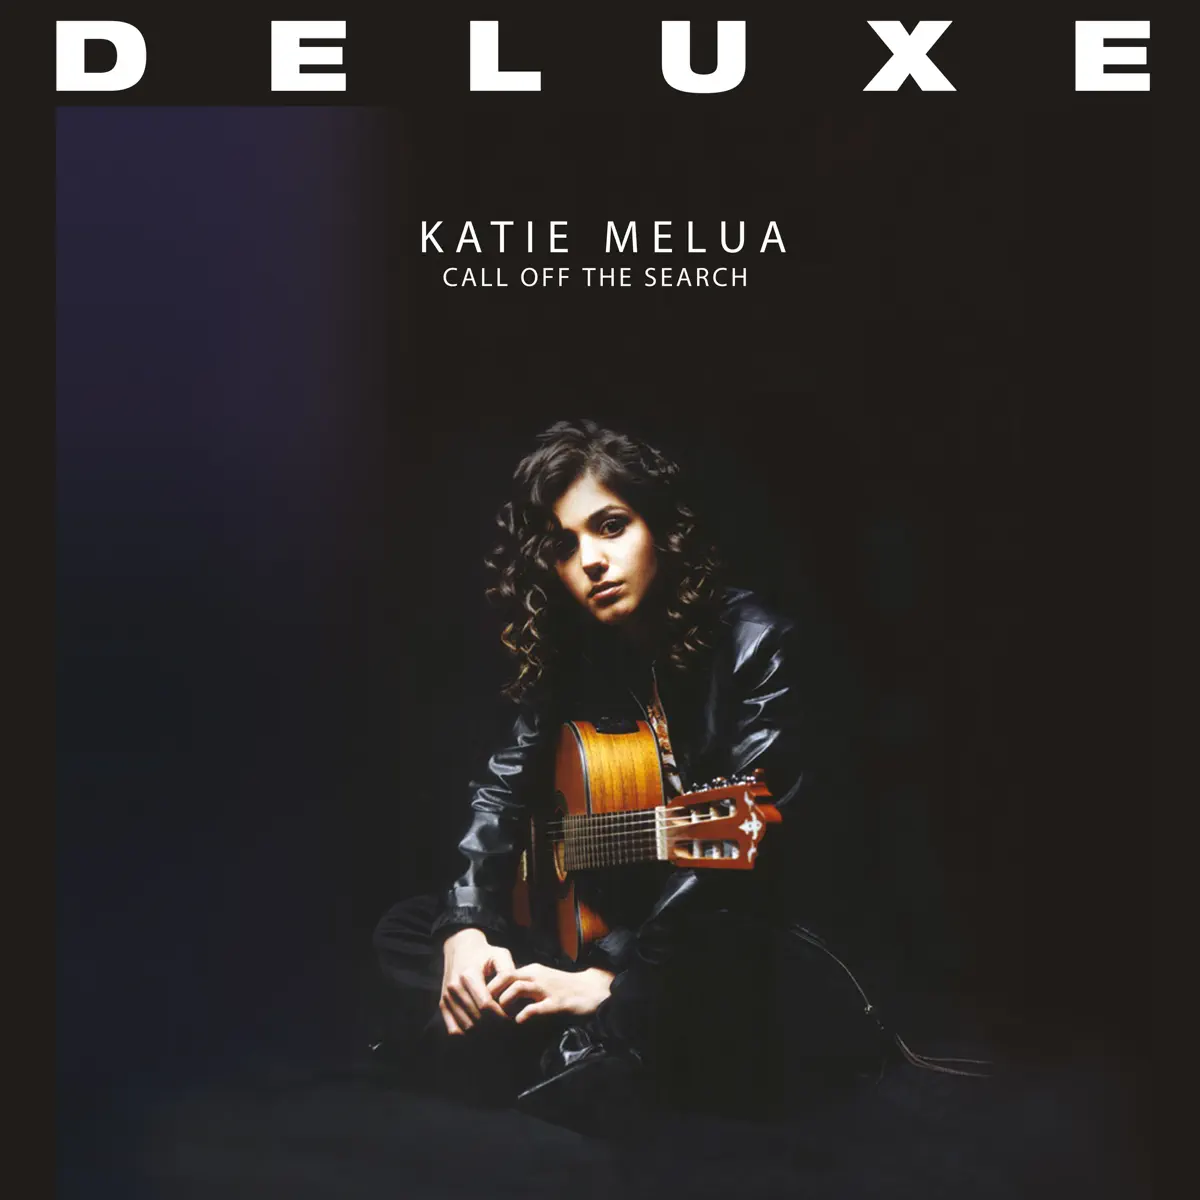 Katie Melua - Call Off the Search (Deluxe Edition) [2023 Remaster] (2023) [iTunes Plus AAC M4A]-新房子